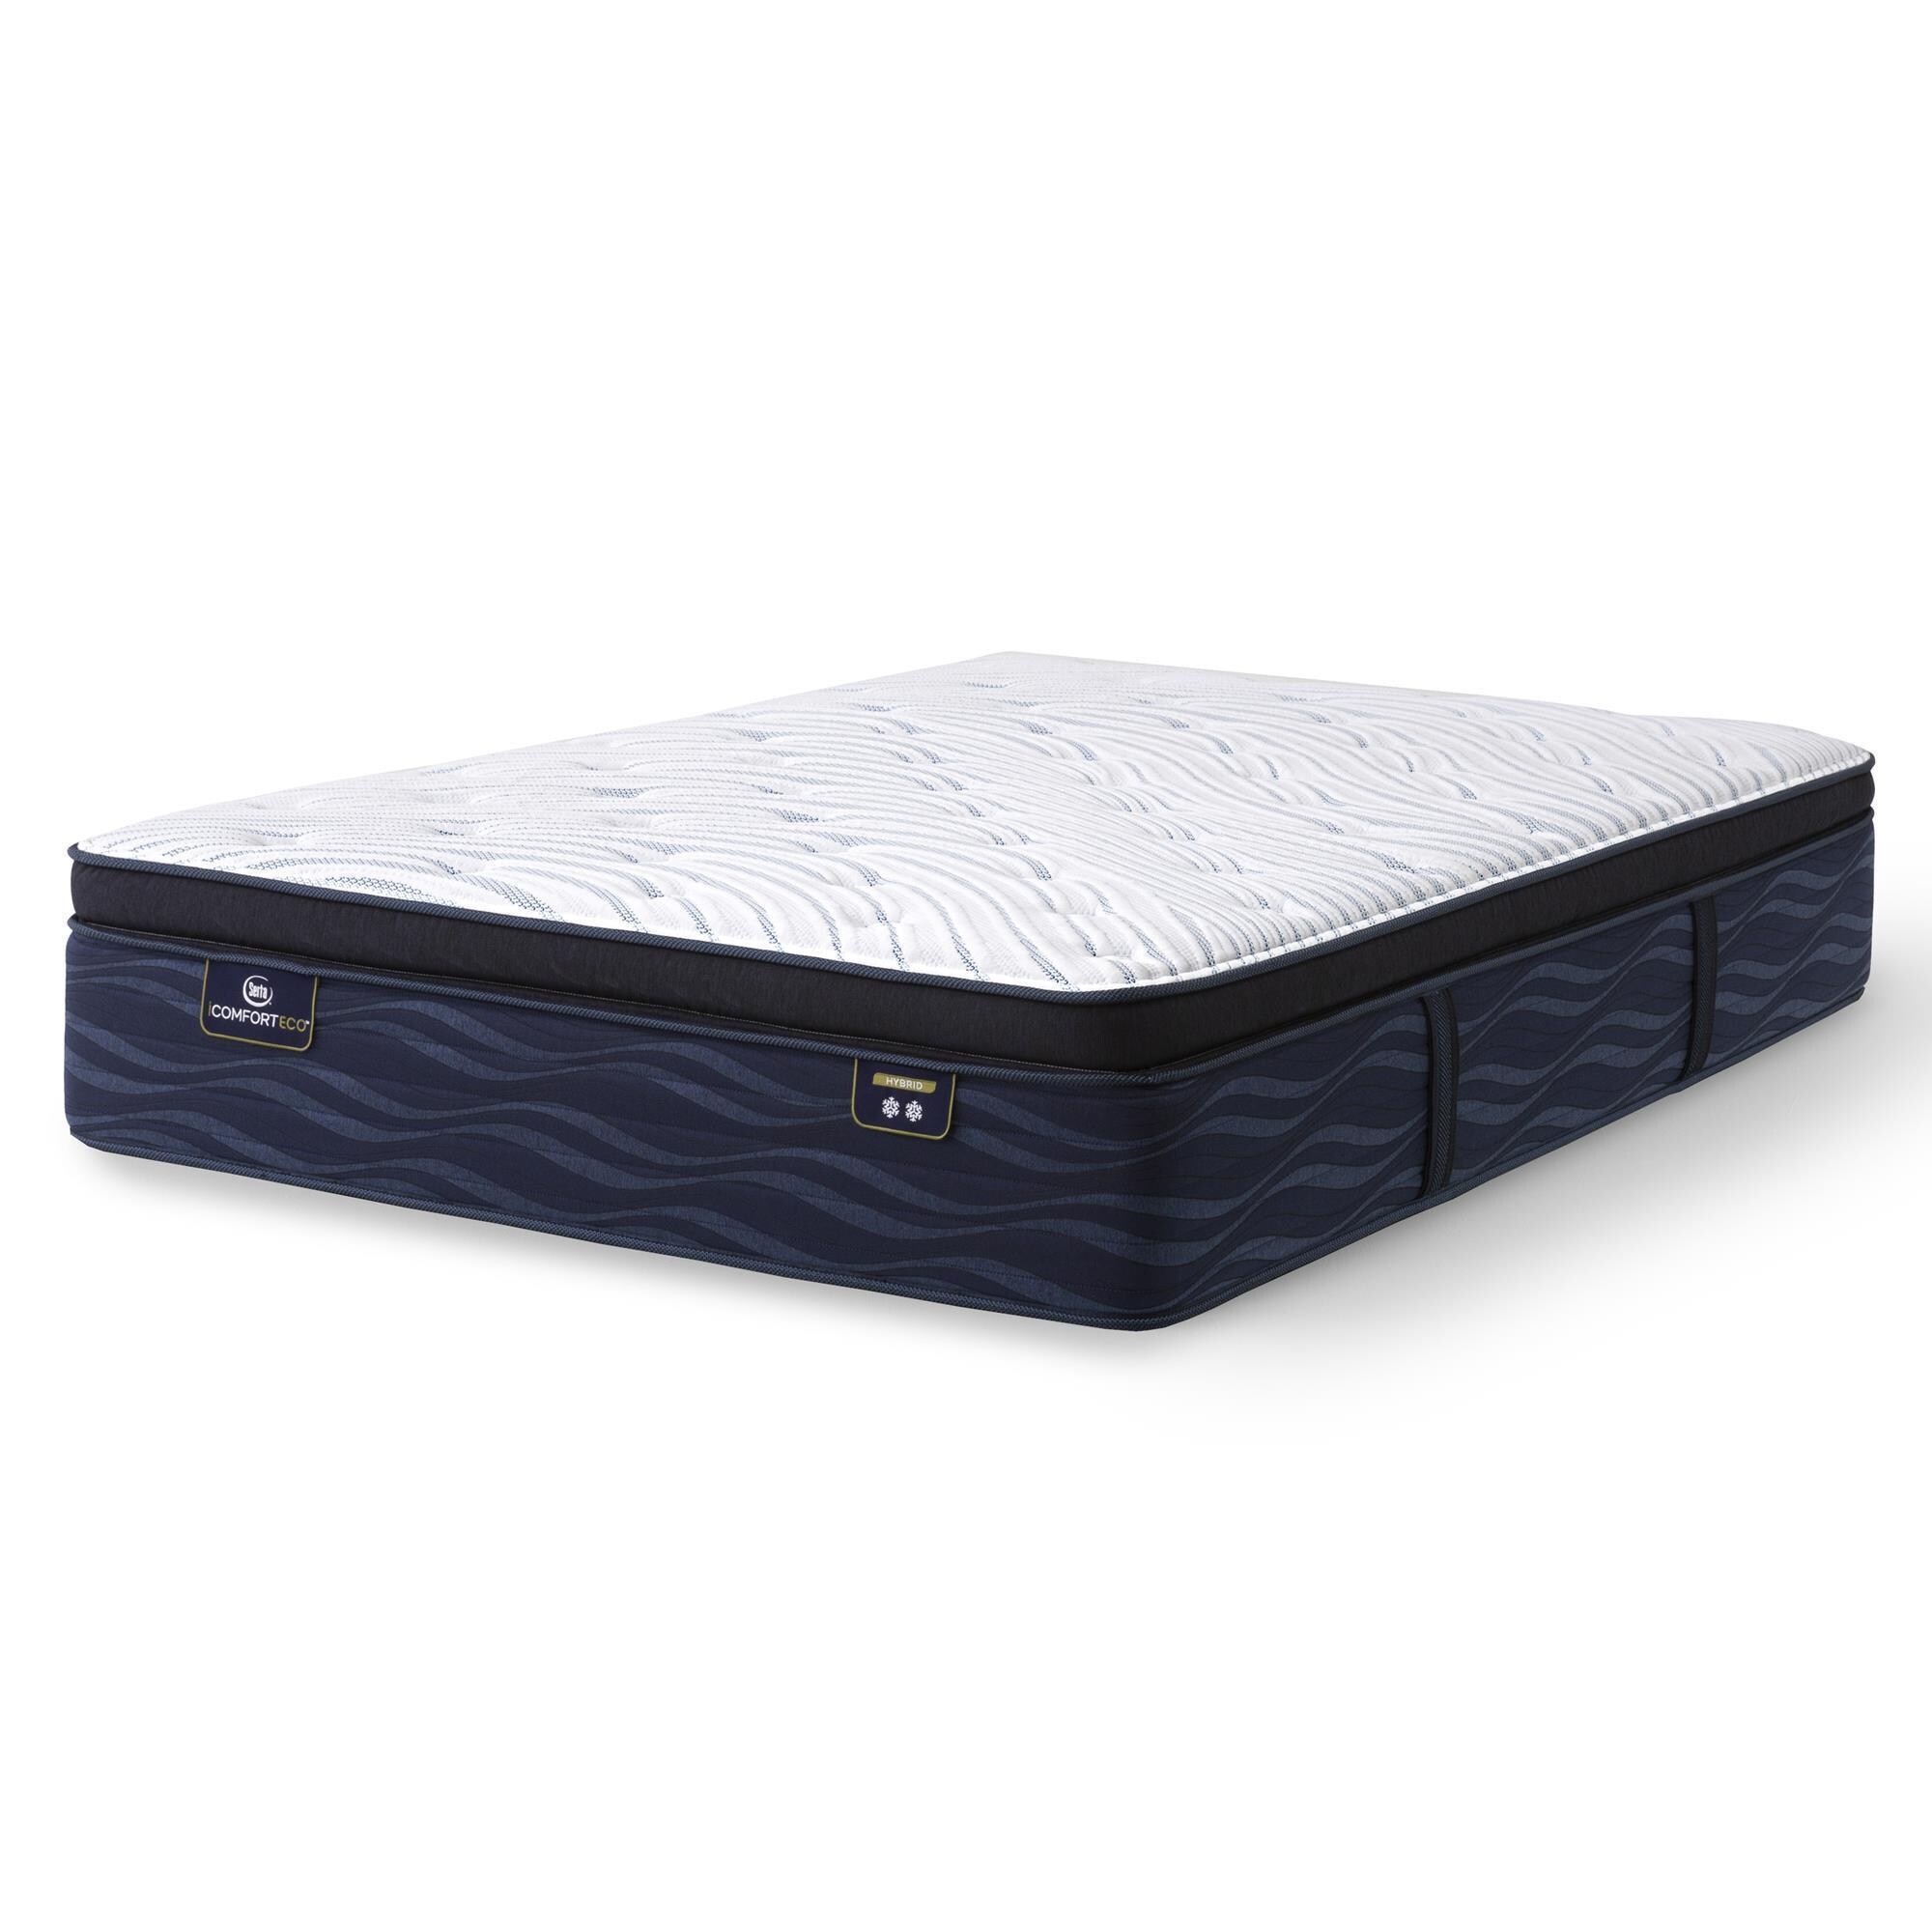 Serta Icomforteco Quilted Hybrid Medium Pillow Top Twin Mattress With High Profile Box Spring Nfm 4680